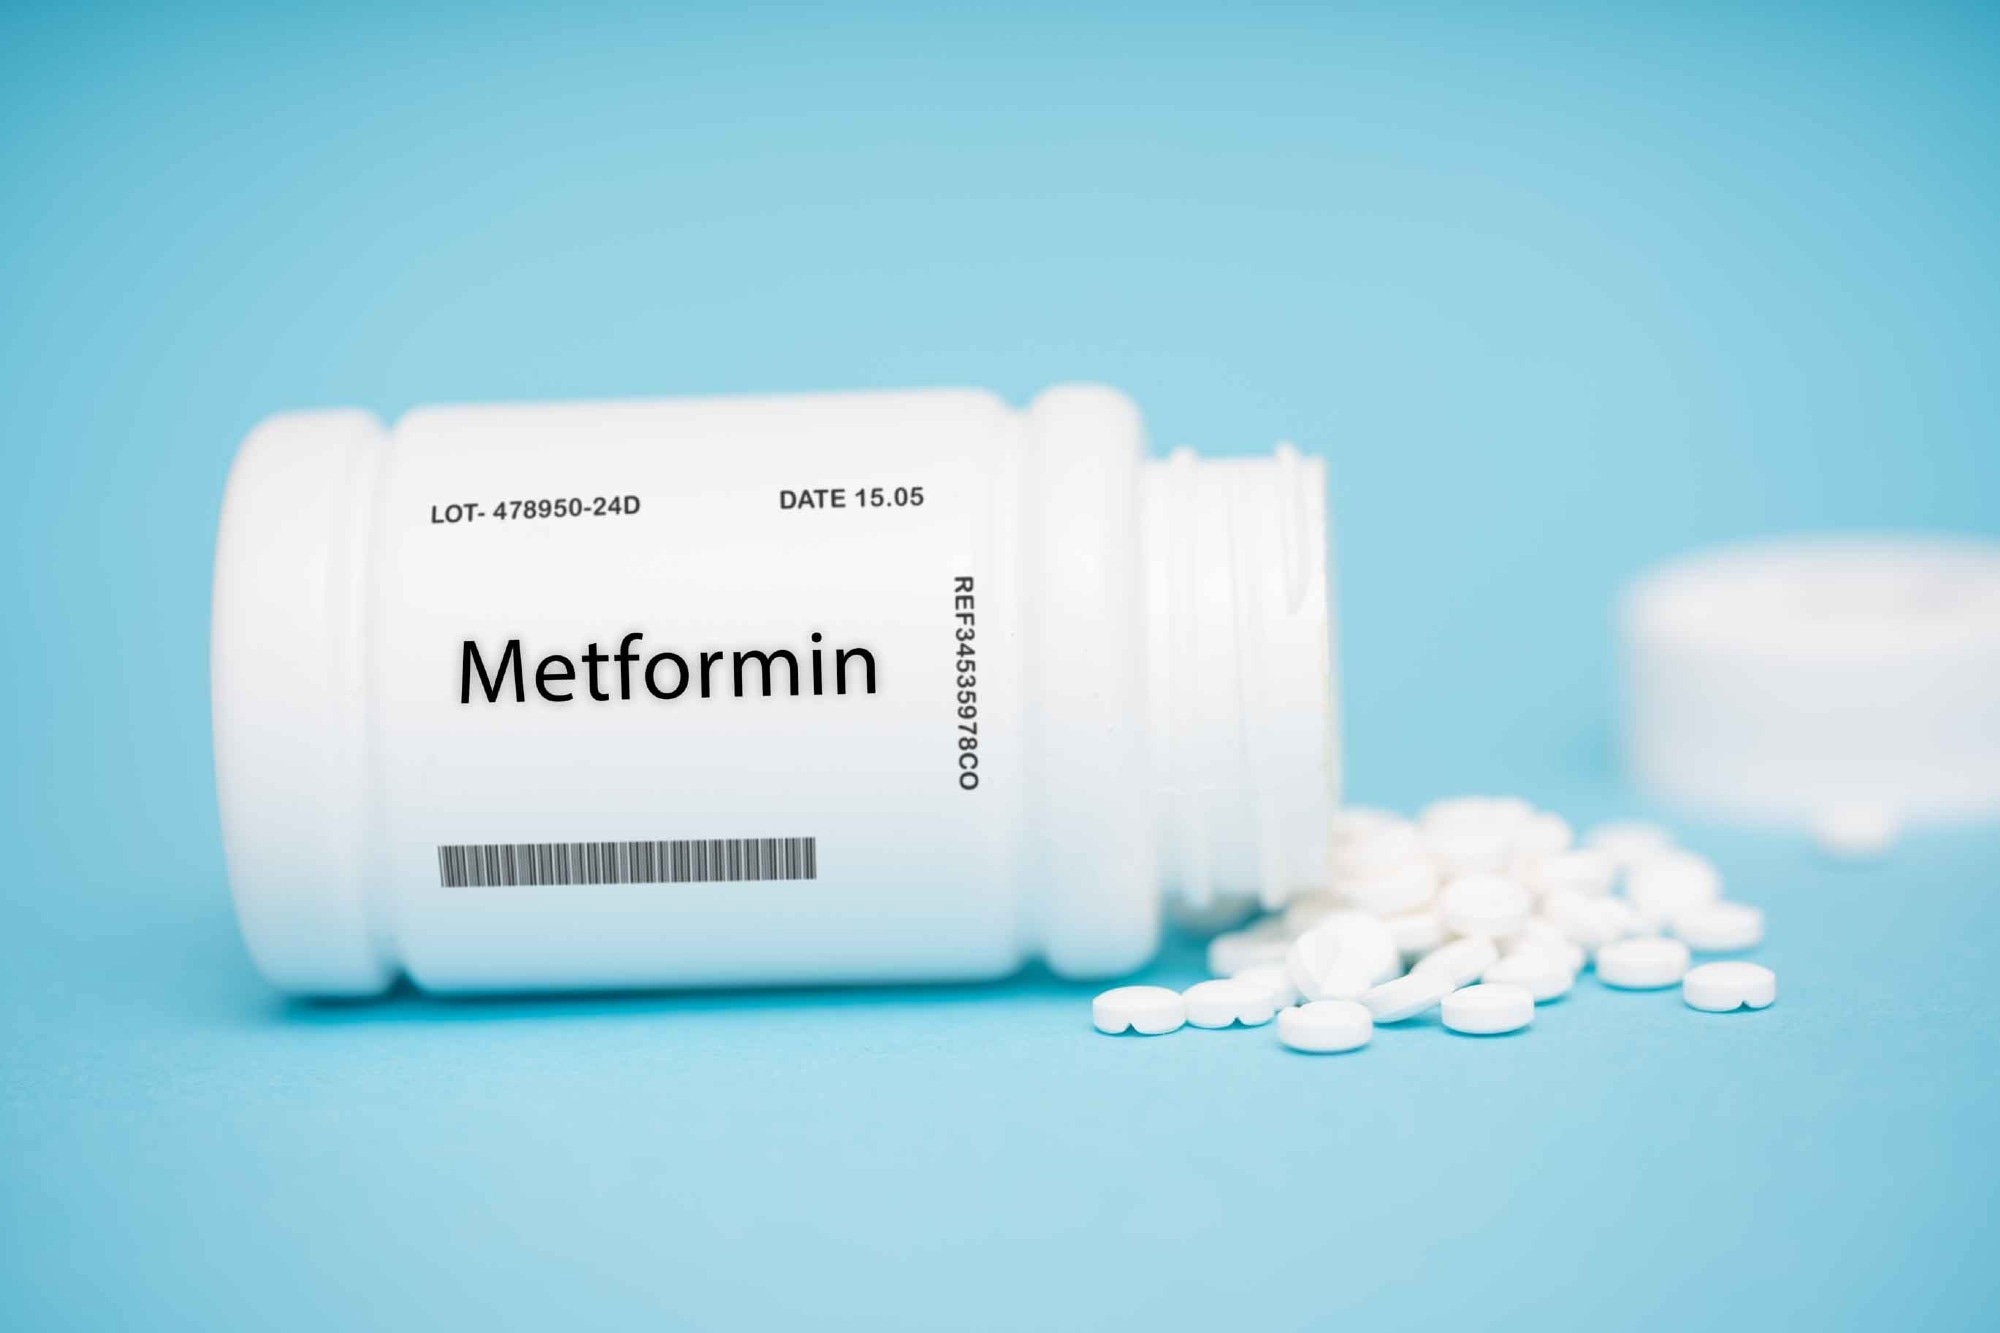 Study: Metformin and feeding increase levels of the appetite-suppressing metabolite Lac-Phe in humans. Image Credit: LuchschenF / Shutterstock